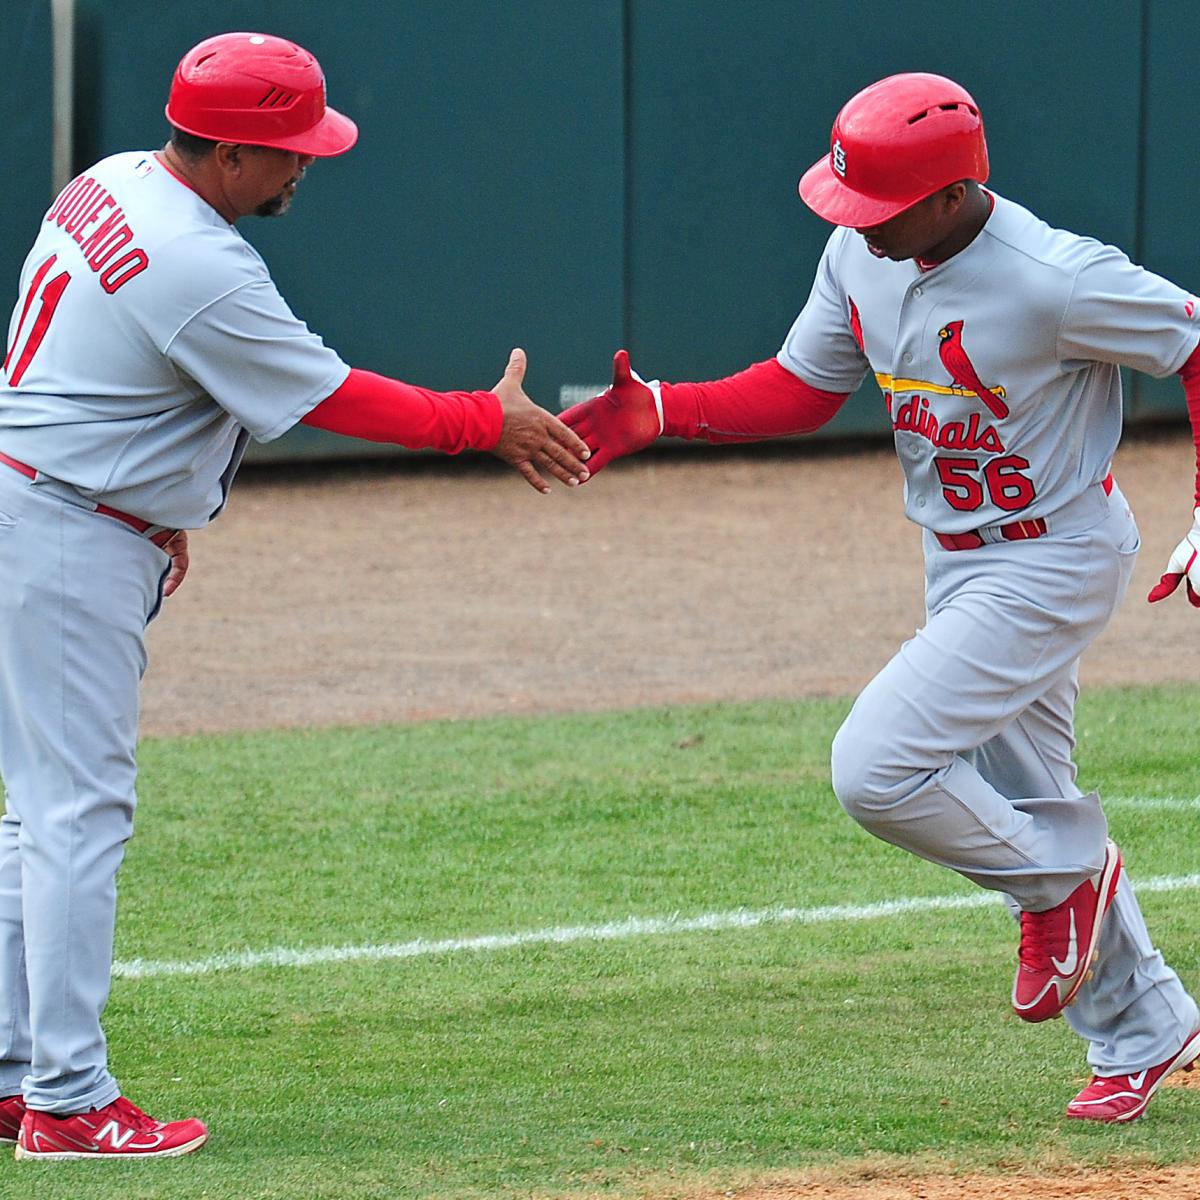 Early Season St. Louis Cardinals Storylines to Follow Most Closely | Bleacher Report | Latest ...